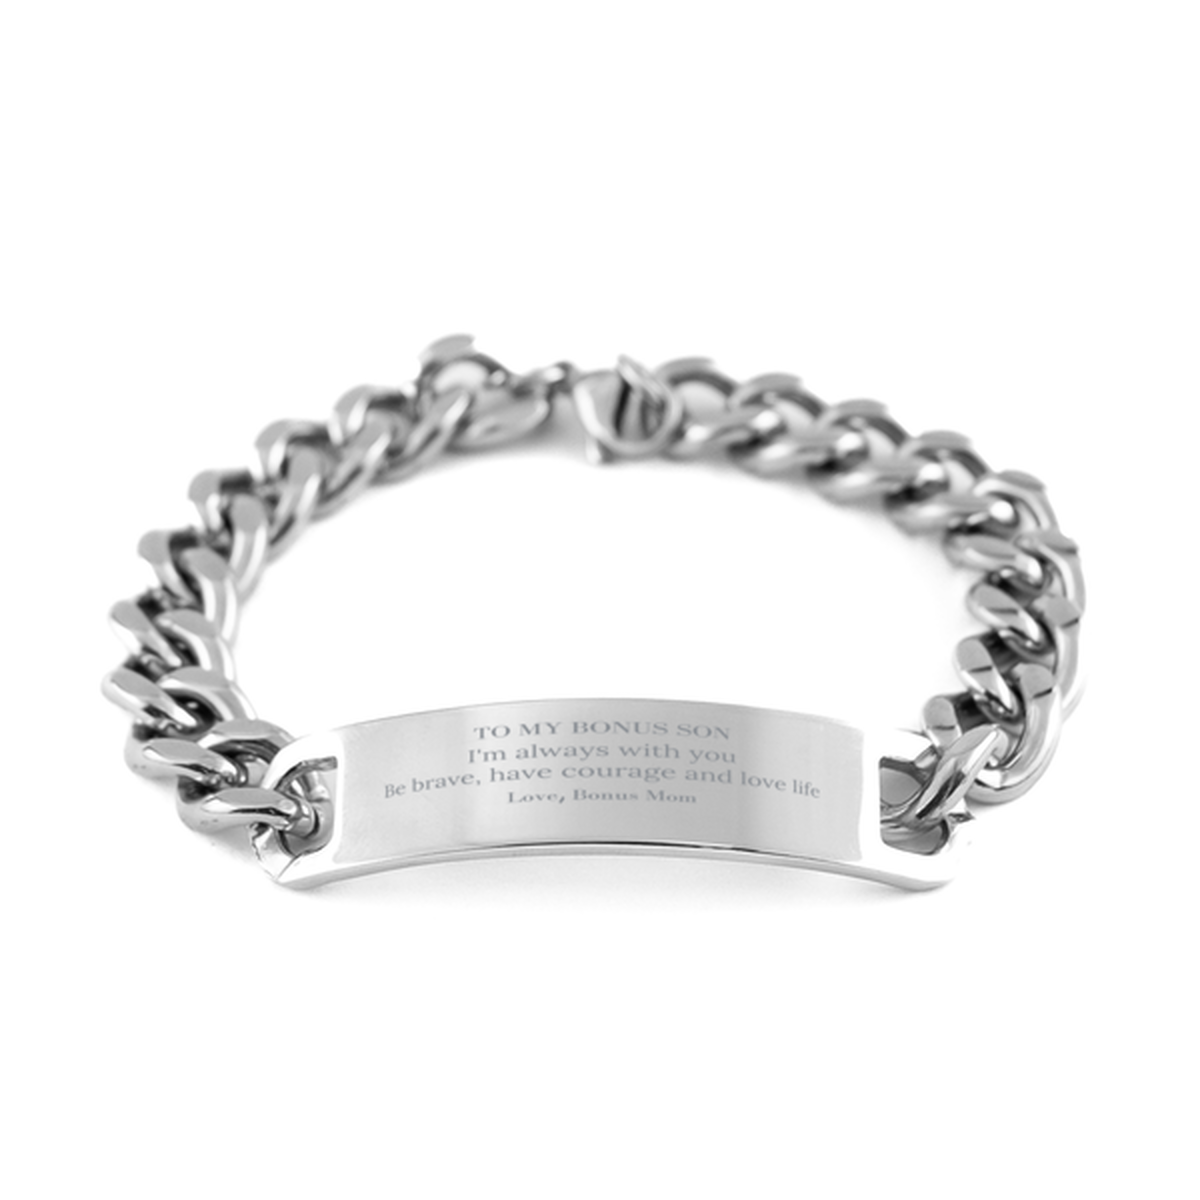 To My Bonus Son Gifts from Bonus Mom, Unique Cuban Chain Stainless Steel Bracelet Inspirational Christmas Birthday Graduation Gifts for Bonus Son I'm always with you. Be brave, have courage and love life. Love, Bonus Mom